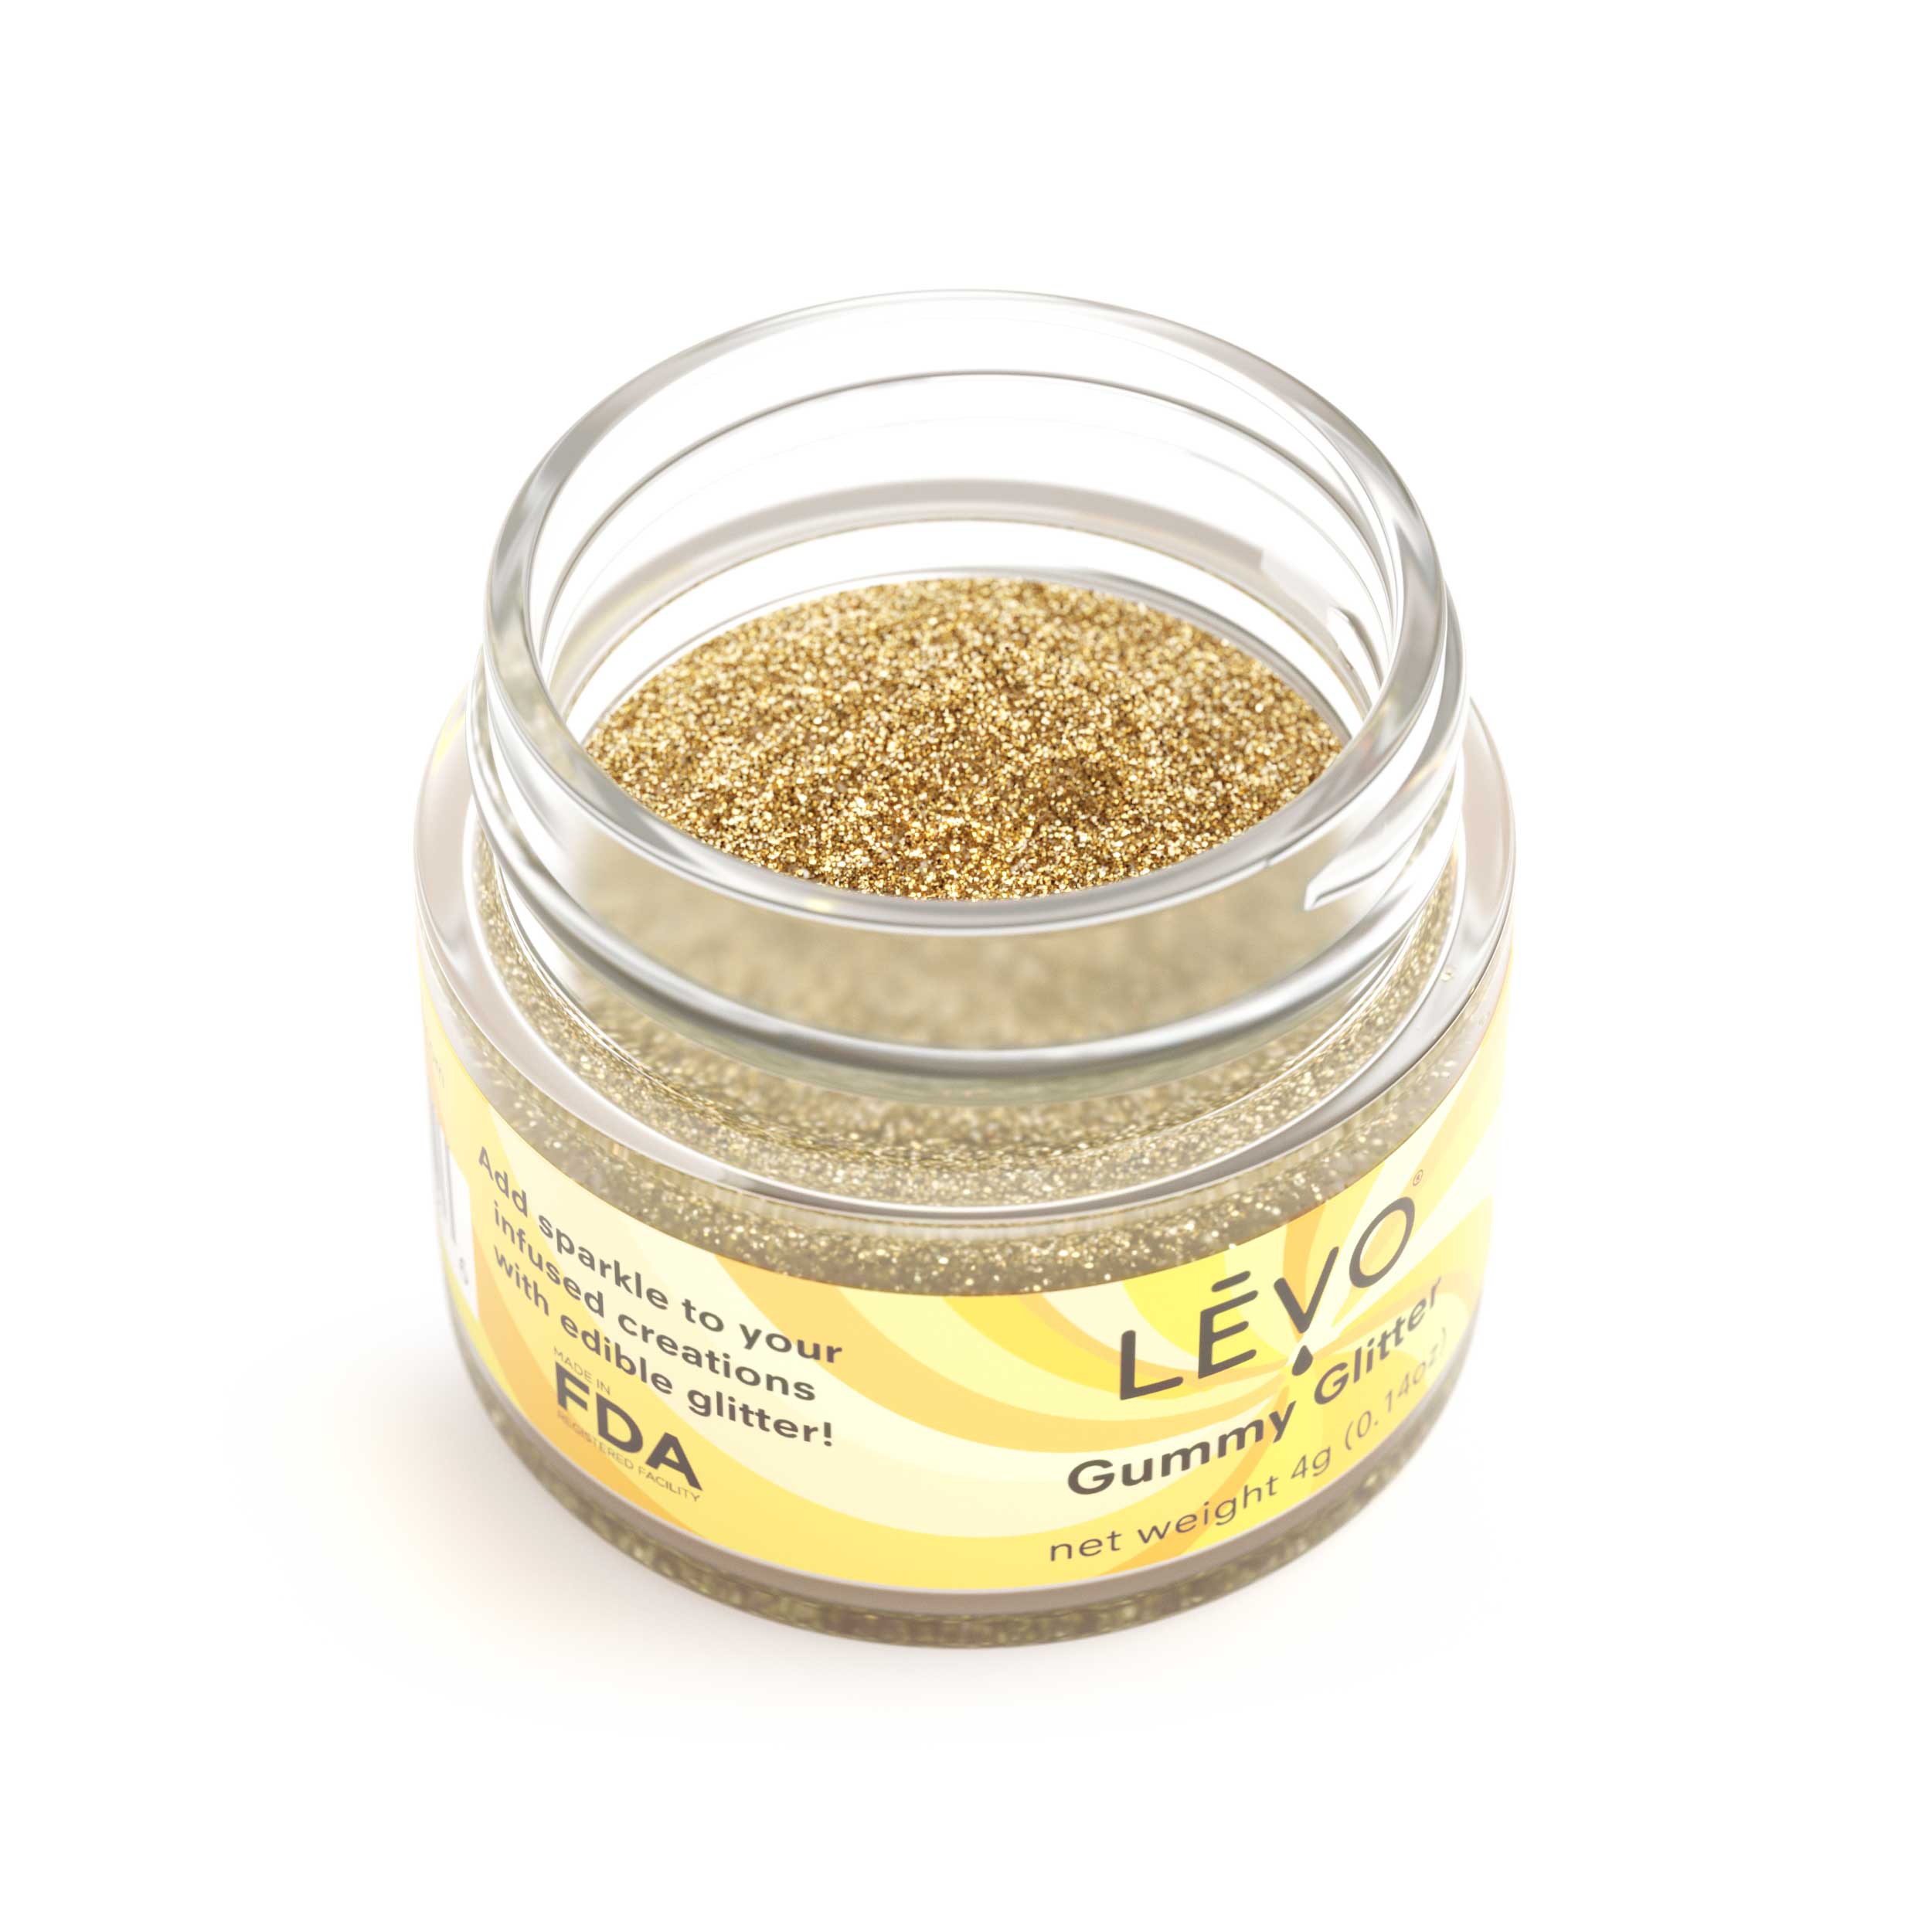 LEVO gummy glitter edible glitter. Get creative in the kitchen with the Gummy Decorating Kit, featuring Edible Glitter, Shimmer, and Sour Sugars.